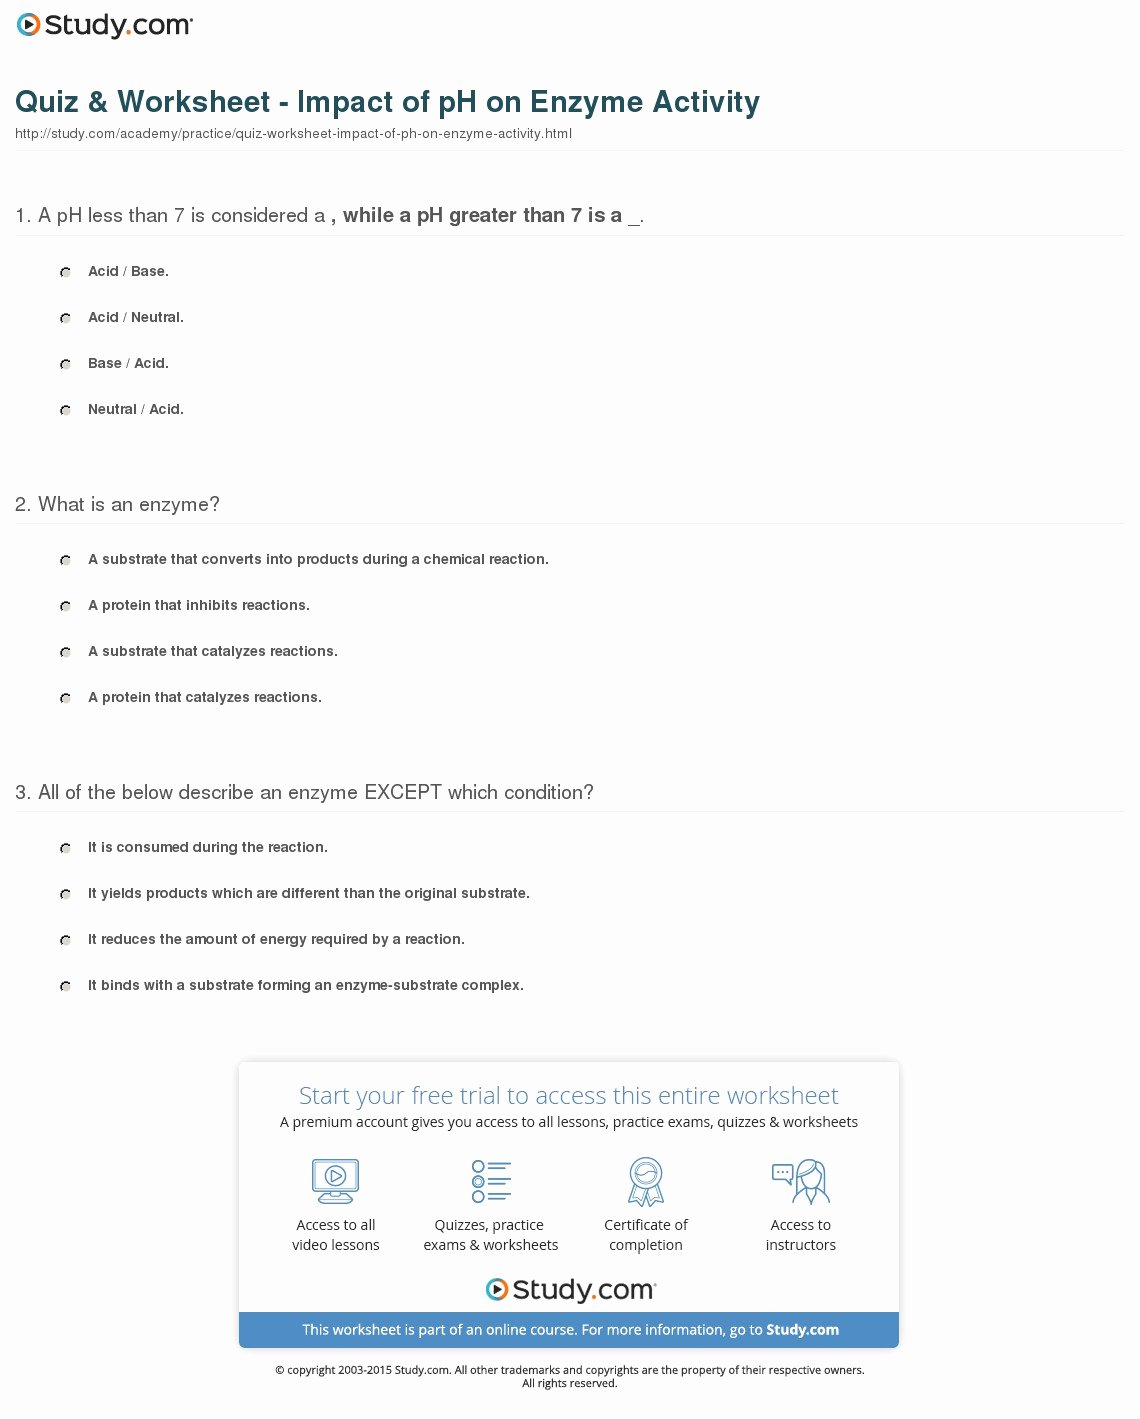 Enzyme Reactions Worksheet Answers Luxury Quiz &amp; Worksheet Impact Of Ph On Enzyme Activity